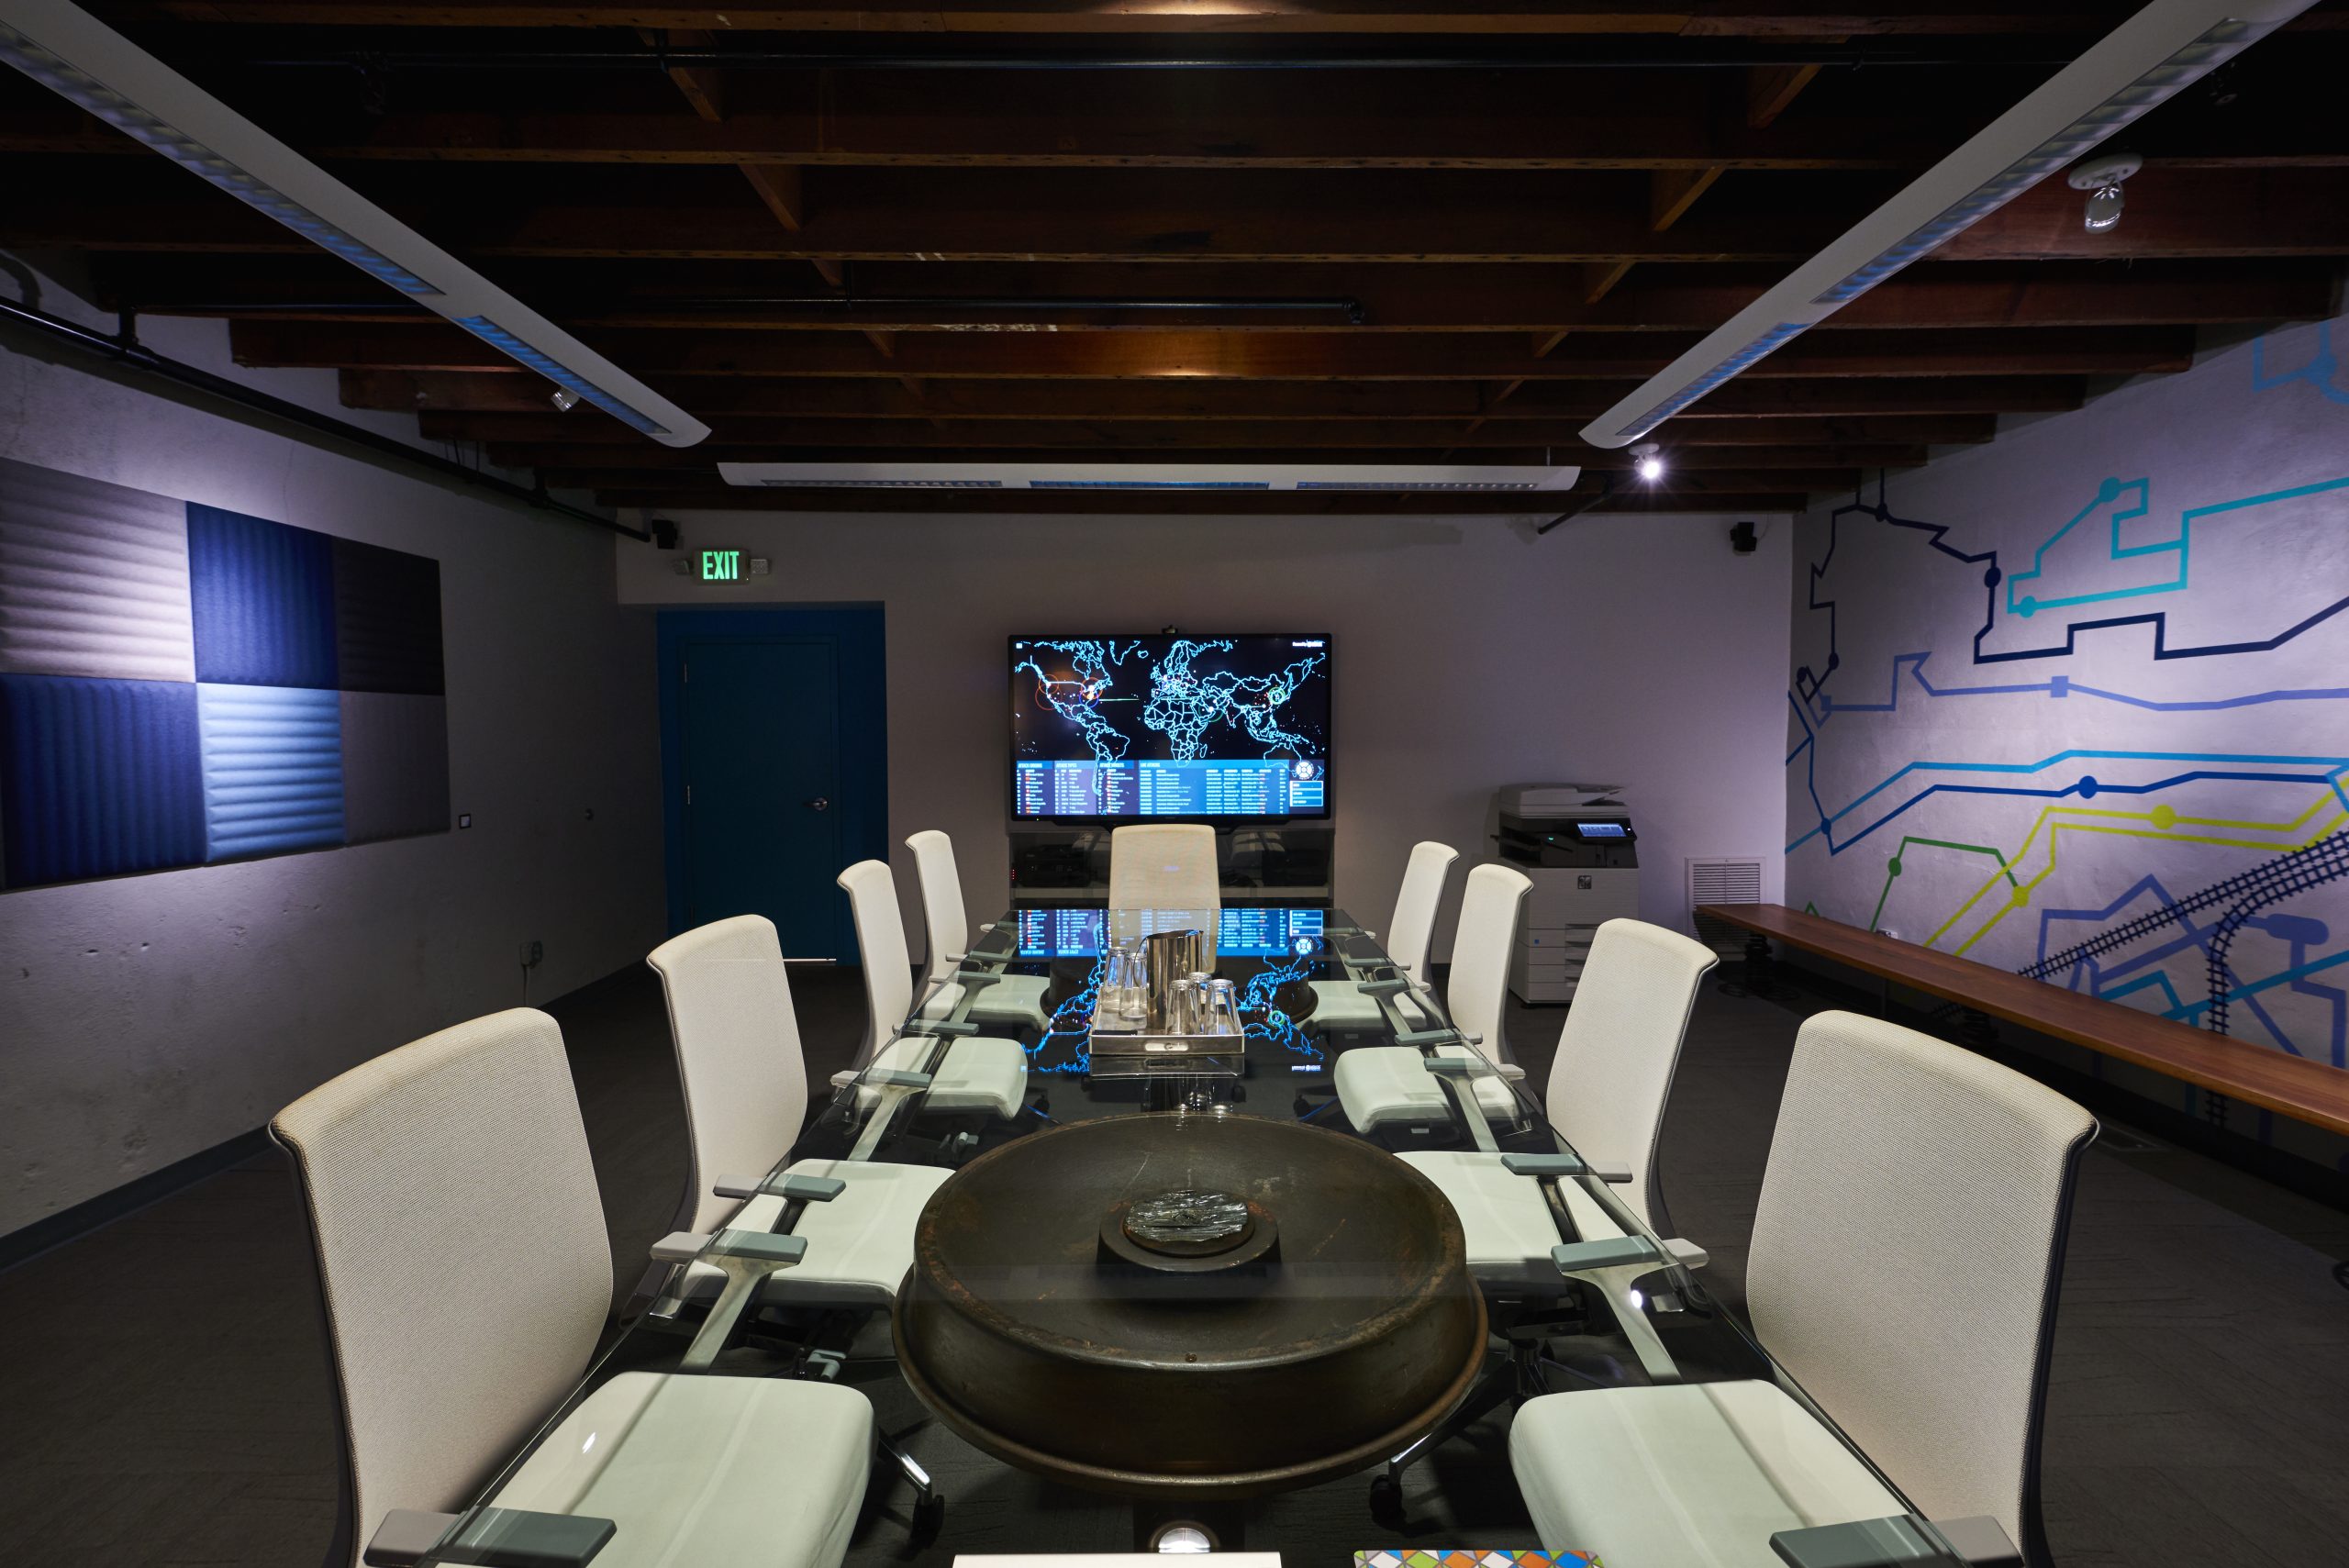 Photo of Kinetic's conference room at night.